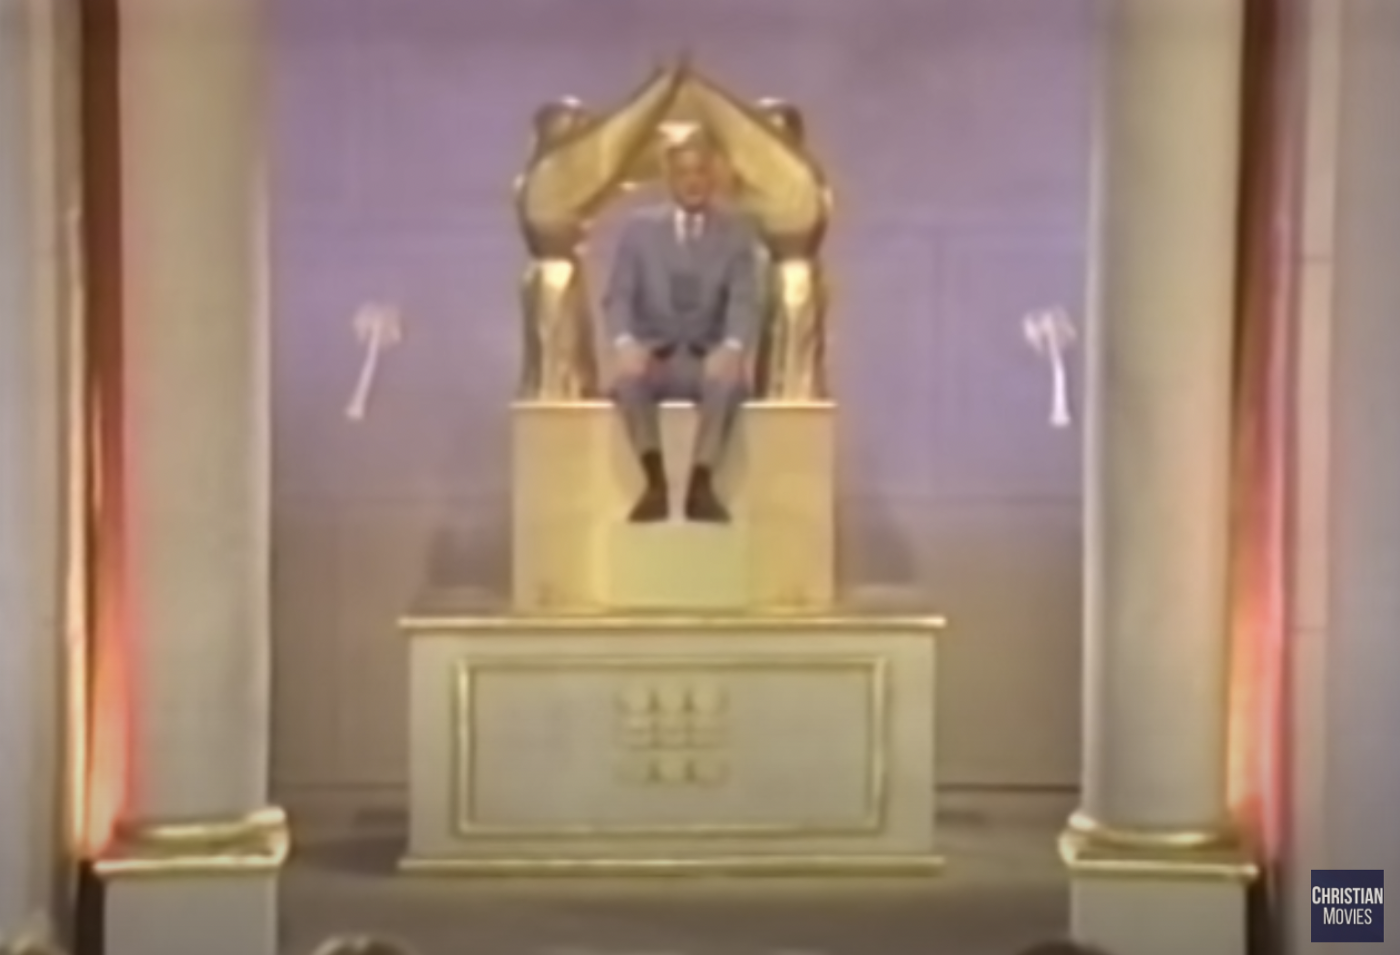 A blond man in a grey suit on a golden throne in a room with two palm trees painted on the  walls.